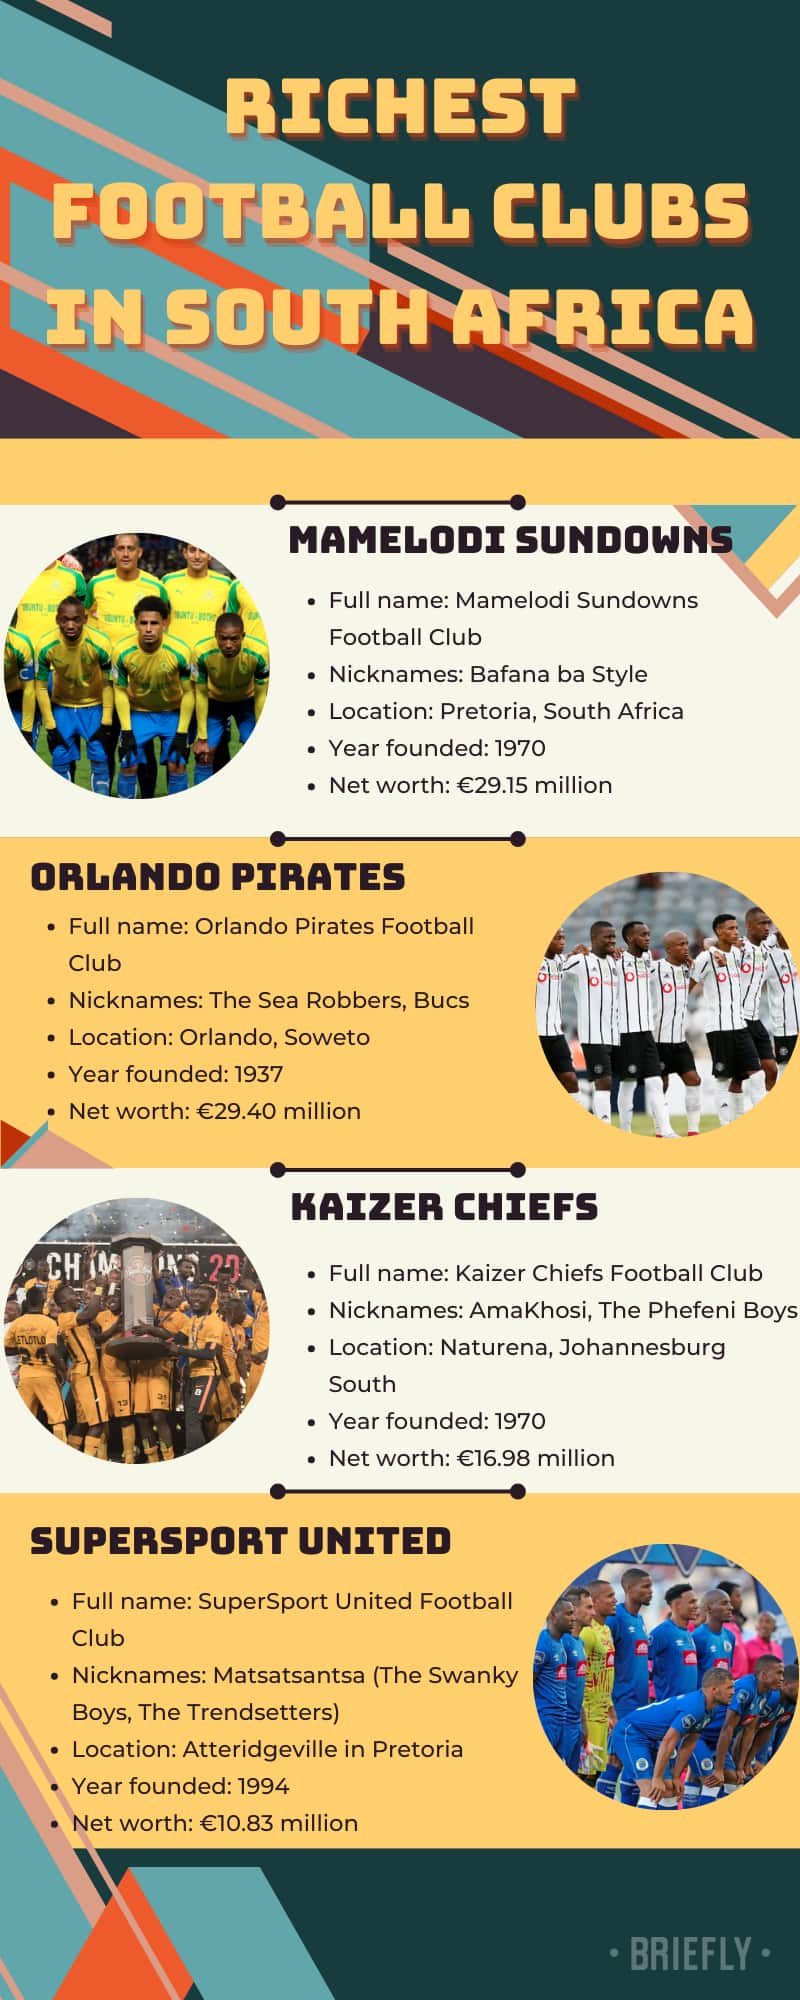 Richest football clubs in South Africa